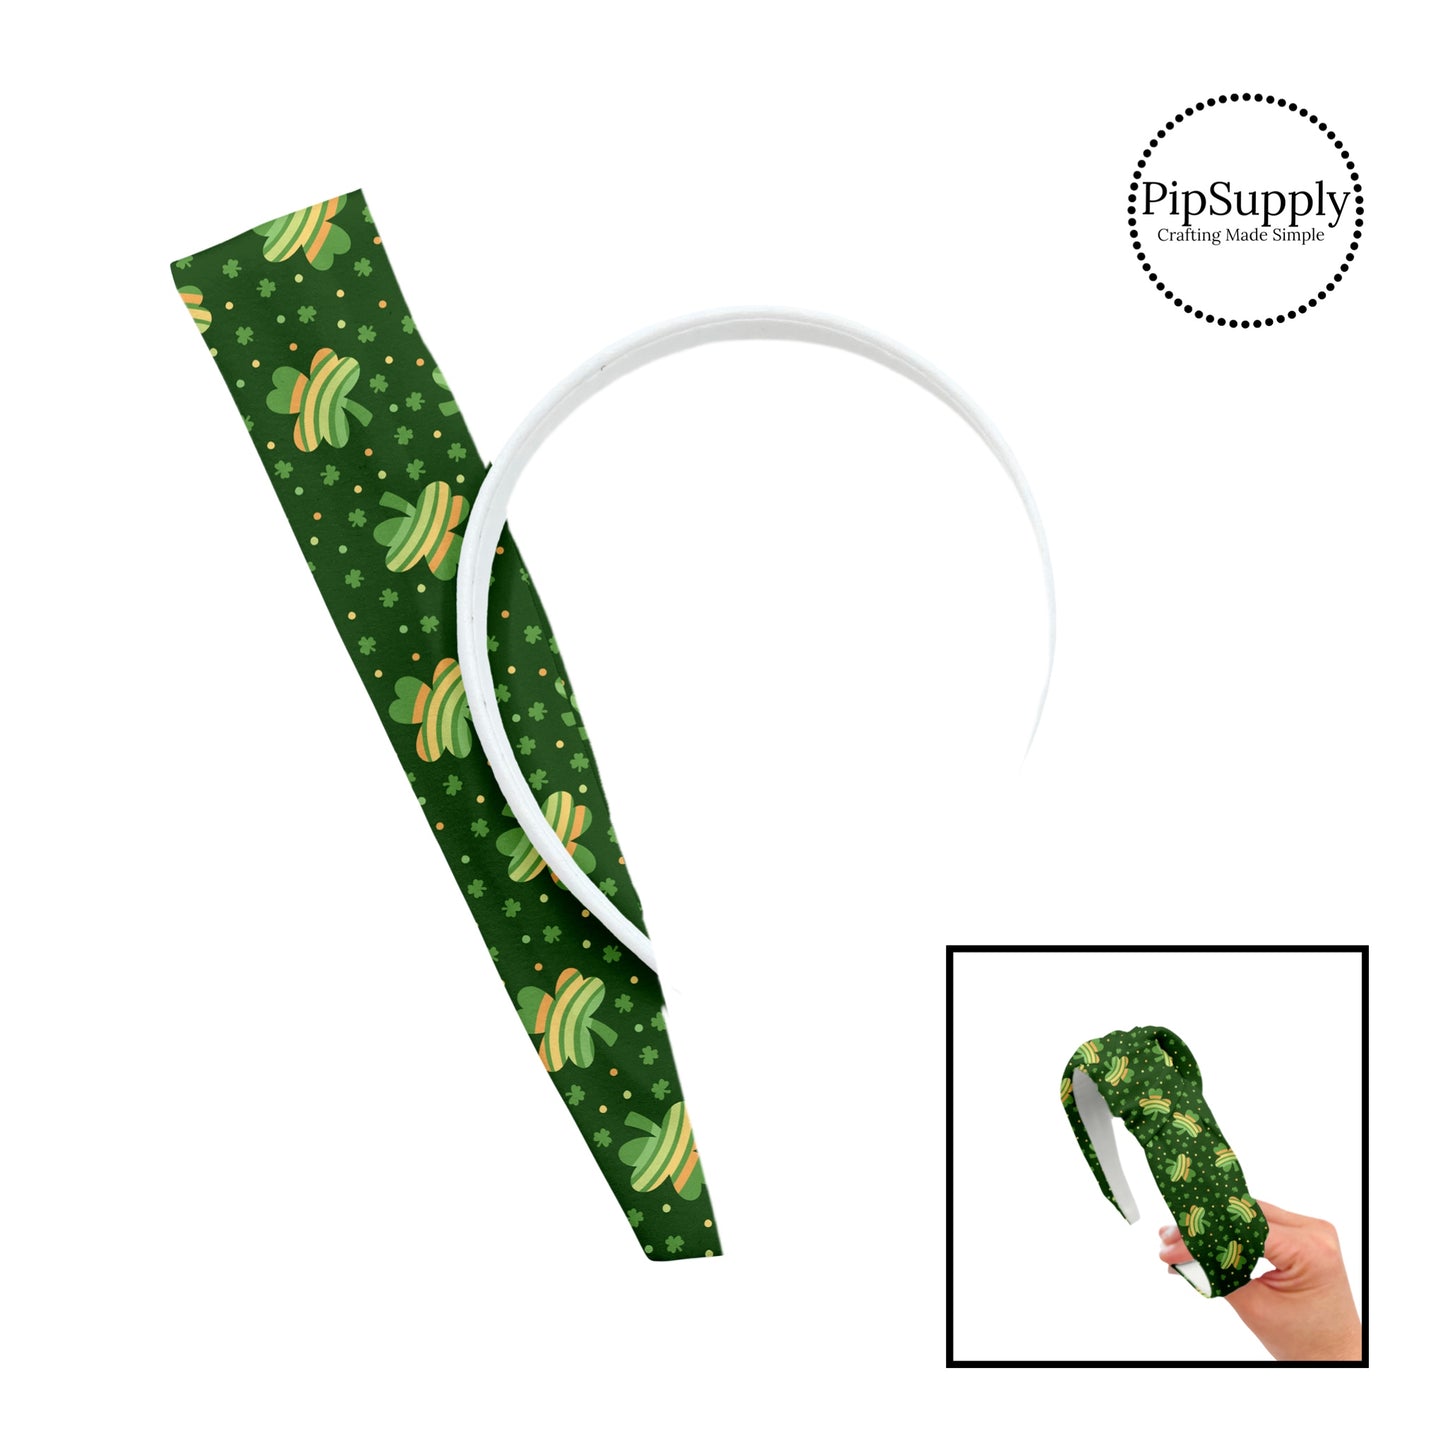 These patterned headband kits are easy to assemble and come with everything you need to make your own knotted headband. These St. Patrick's Day kits include a custom printed and sewn fabric strip and a coordinating velvet headband. This cute pattern features rainbow clovers on green. 